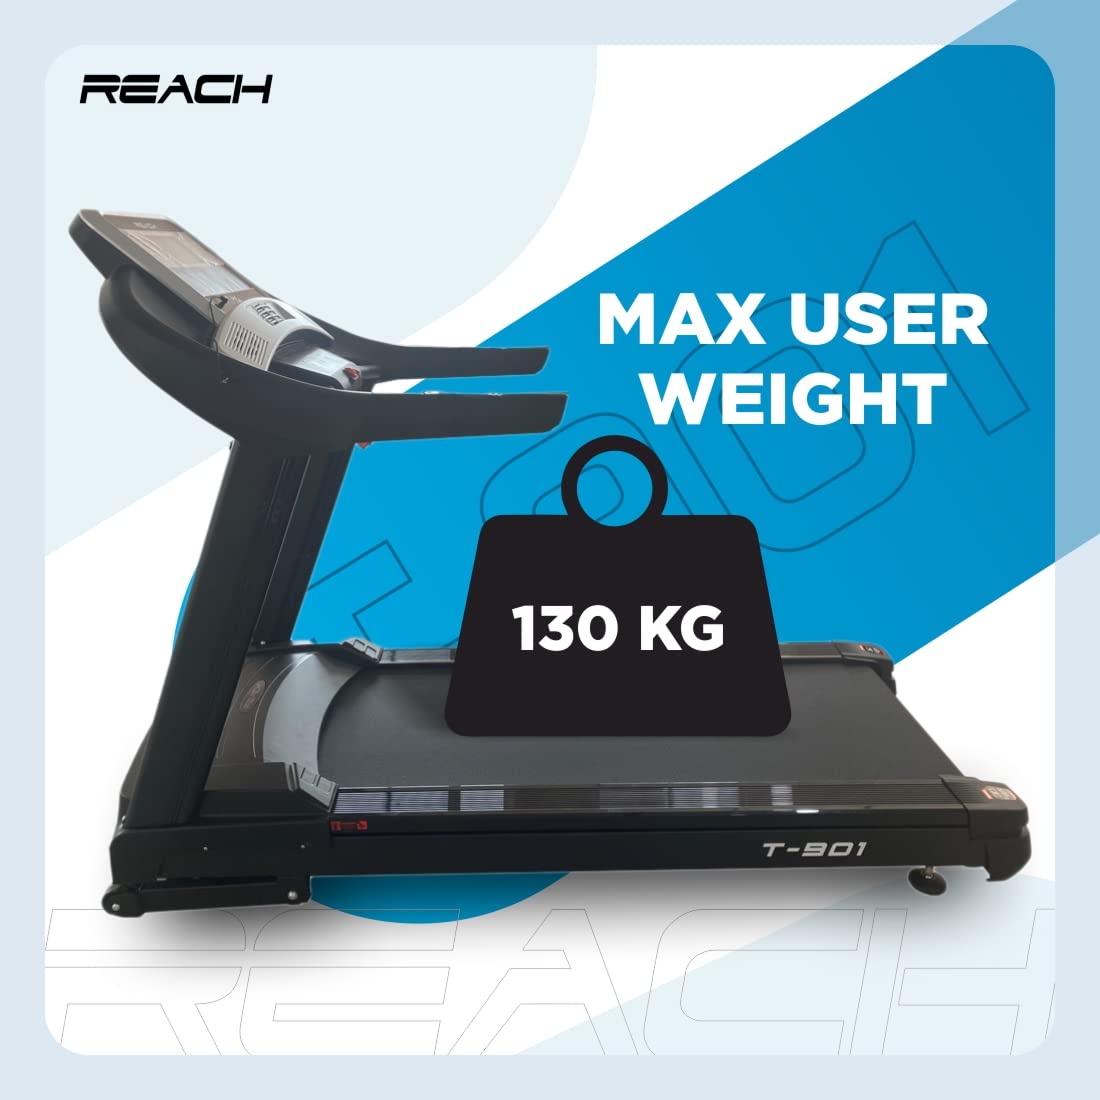 Reach T-901 7 HP Peak DC Motor Premium Treadmill | Automatic Incline with Powerful Motor | Home Exercise & Running Machine | LCD Display with 24 Preset Programs | 24 km/hr Max User Weight 130 Kgs